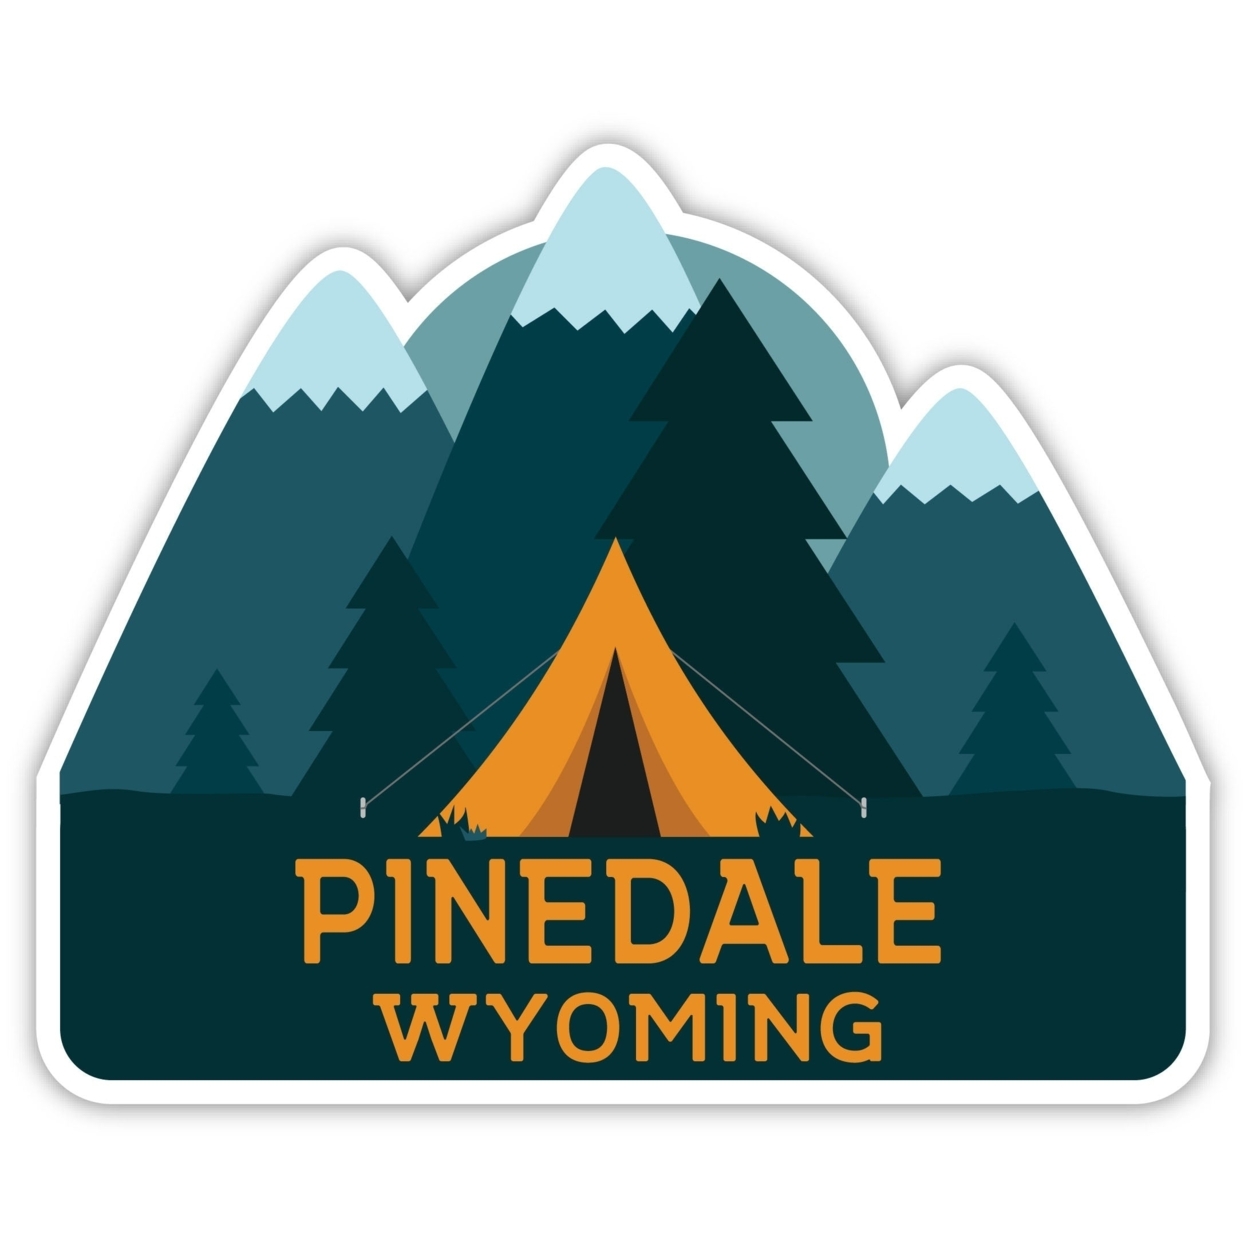 Pinedale Wyoming Souvenir Decorative Stickers (Choose Theme And Size) - Single Unit, 2-Inch, Tent